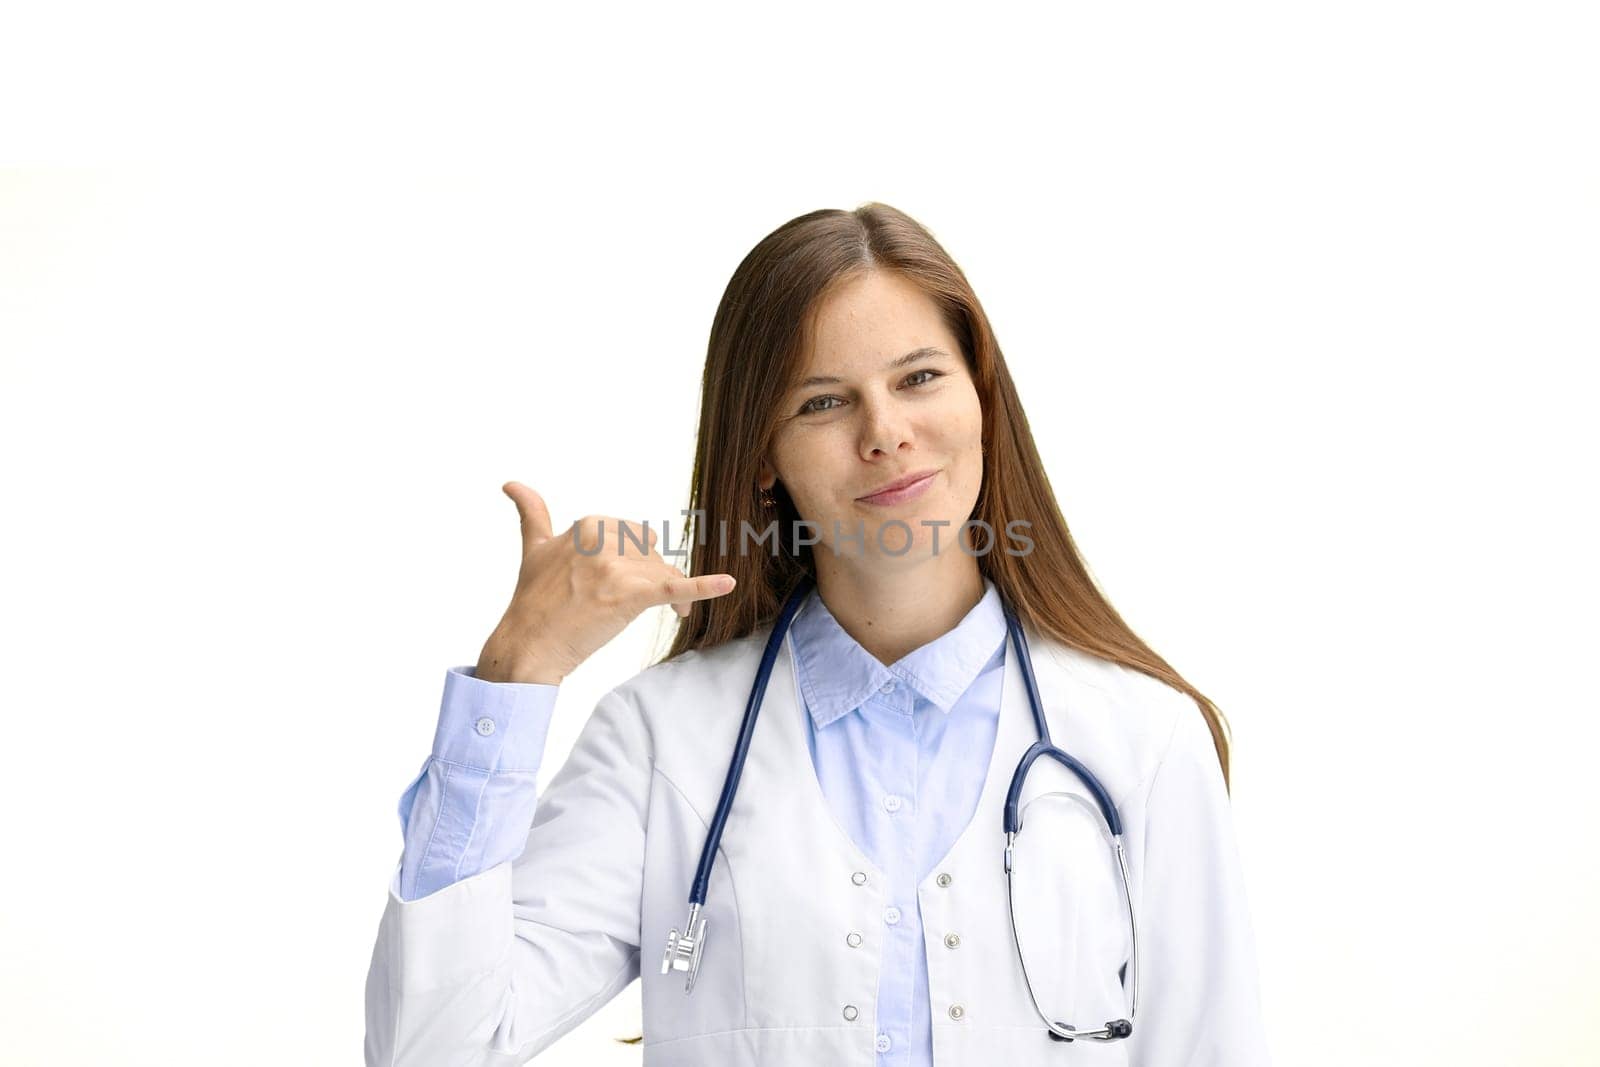 Female doctor, close-up, on a white background, shows a call sign.